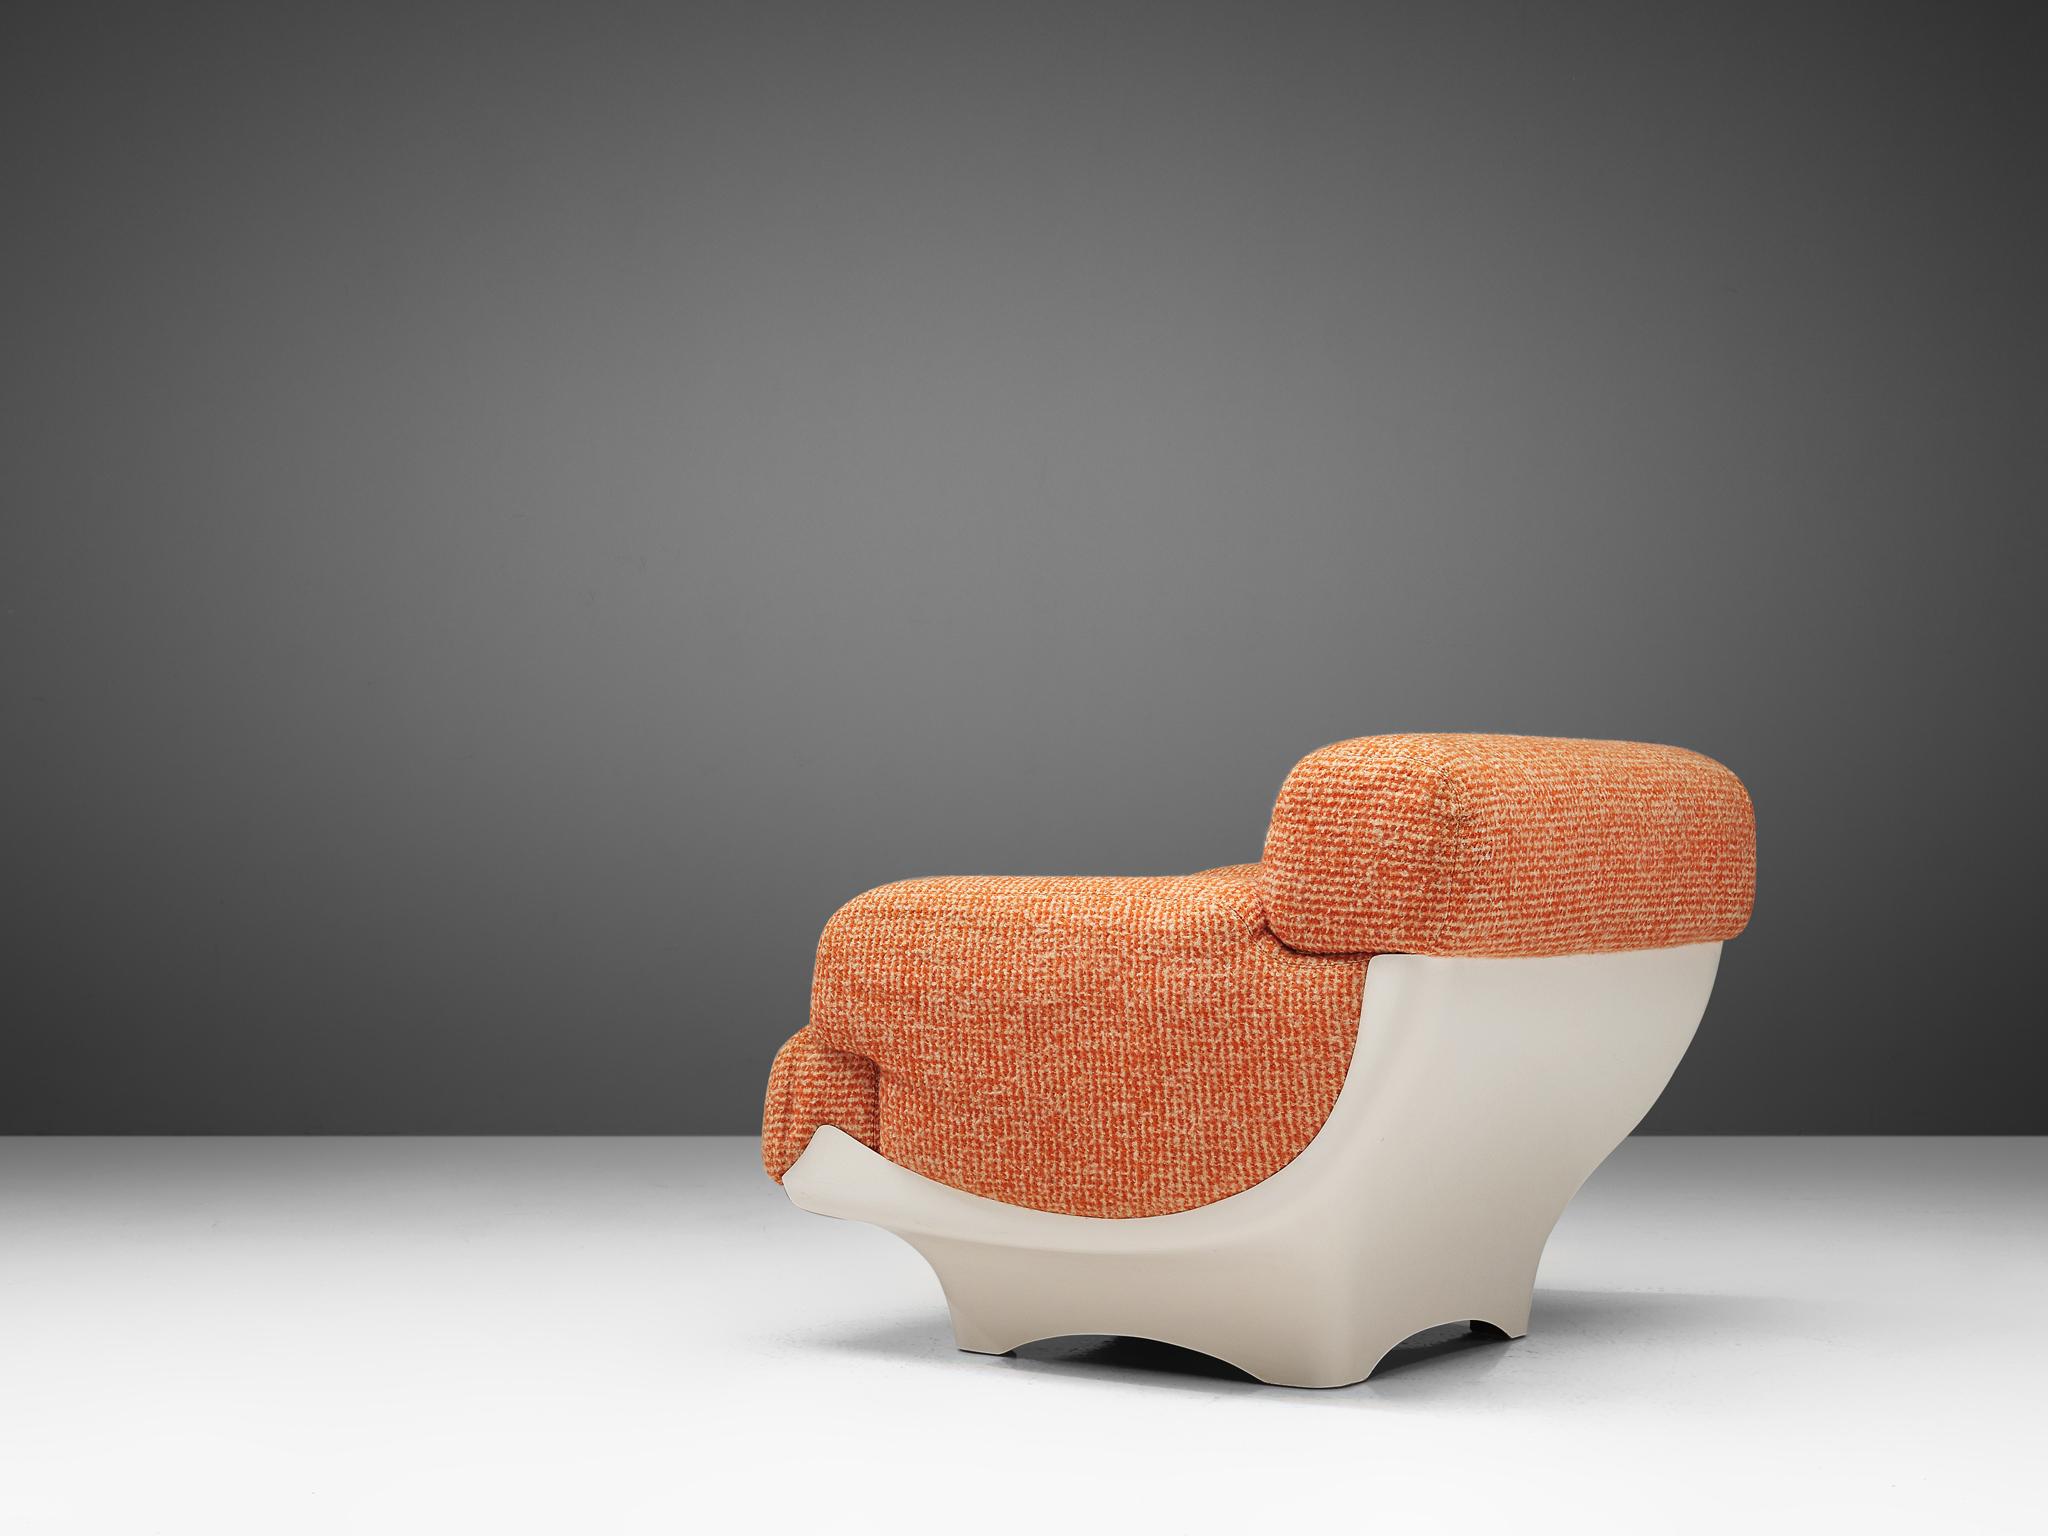 Lounge chair in fiberglass and original fabric upholstery, France, 1970s. 

This highly comfortable lounge chair has a very soft and inviting appearance. The textured orange and beige fabric contrasts nicely with the white fiberglass shell. Due to